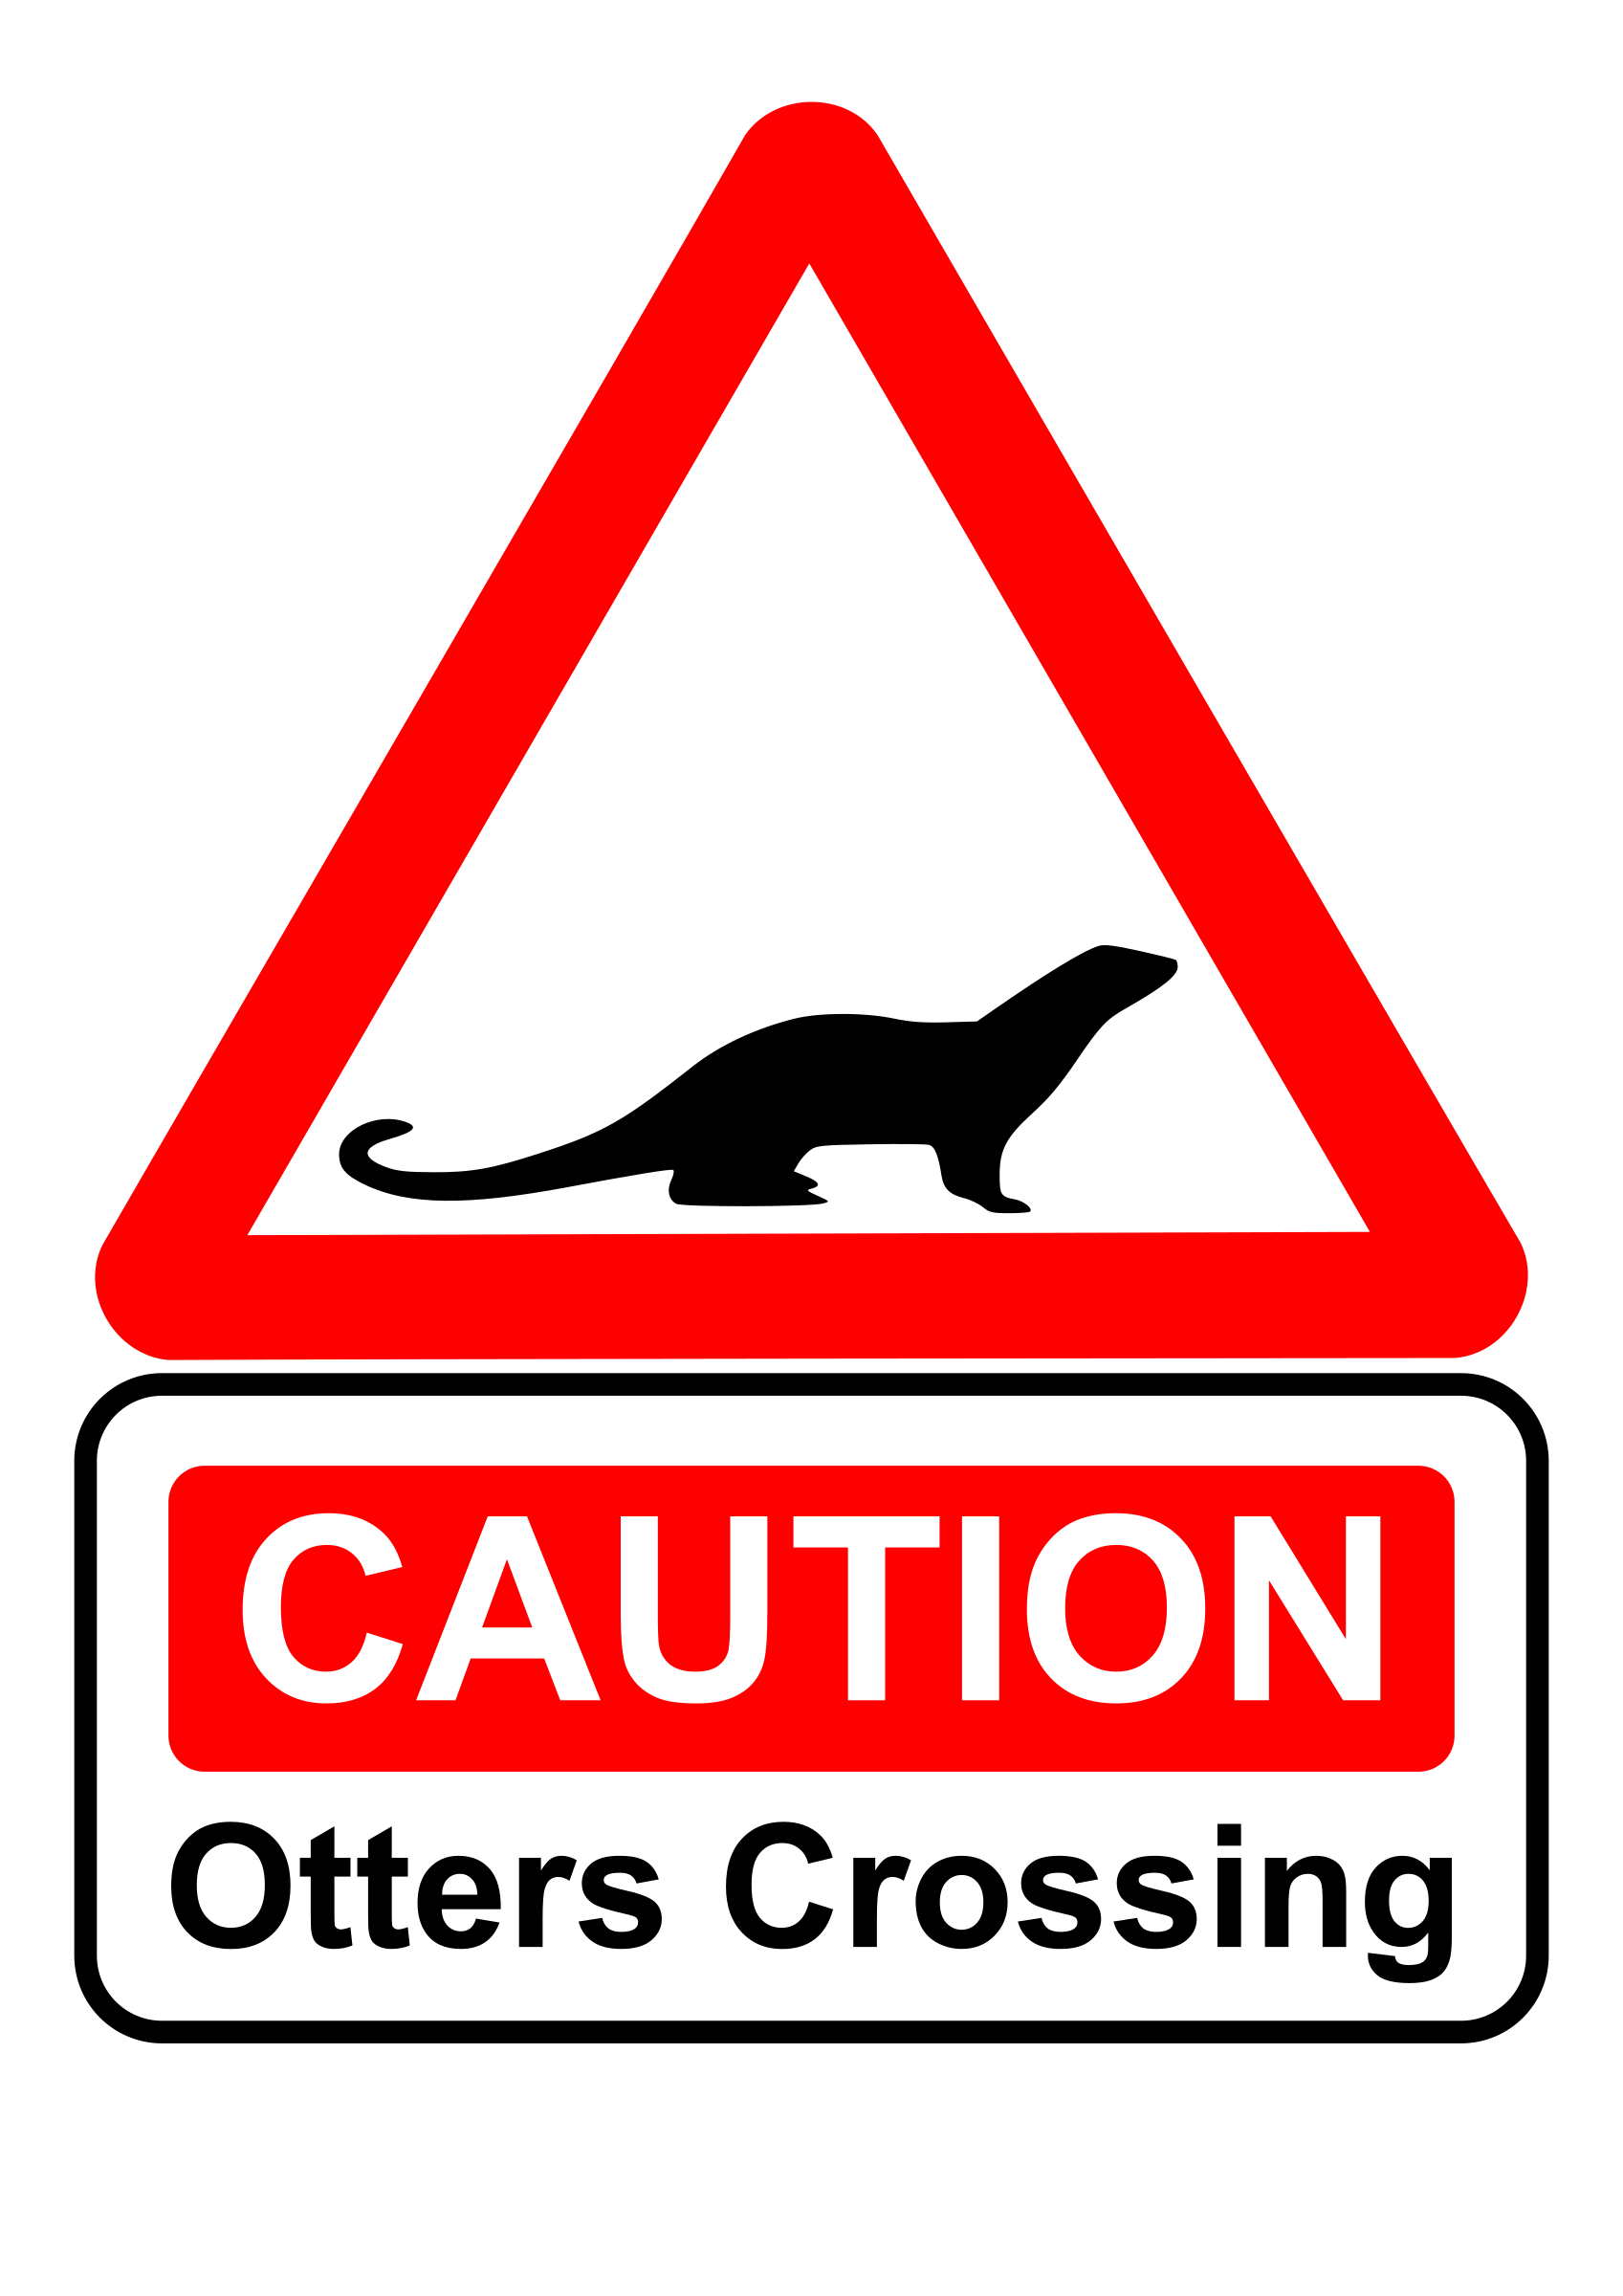 otter clipart two